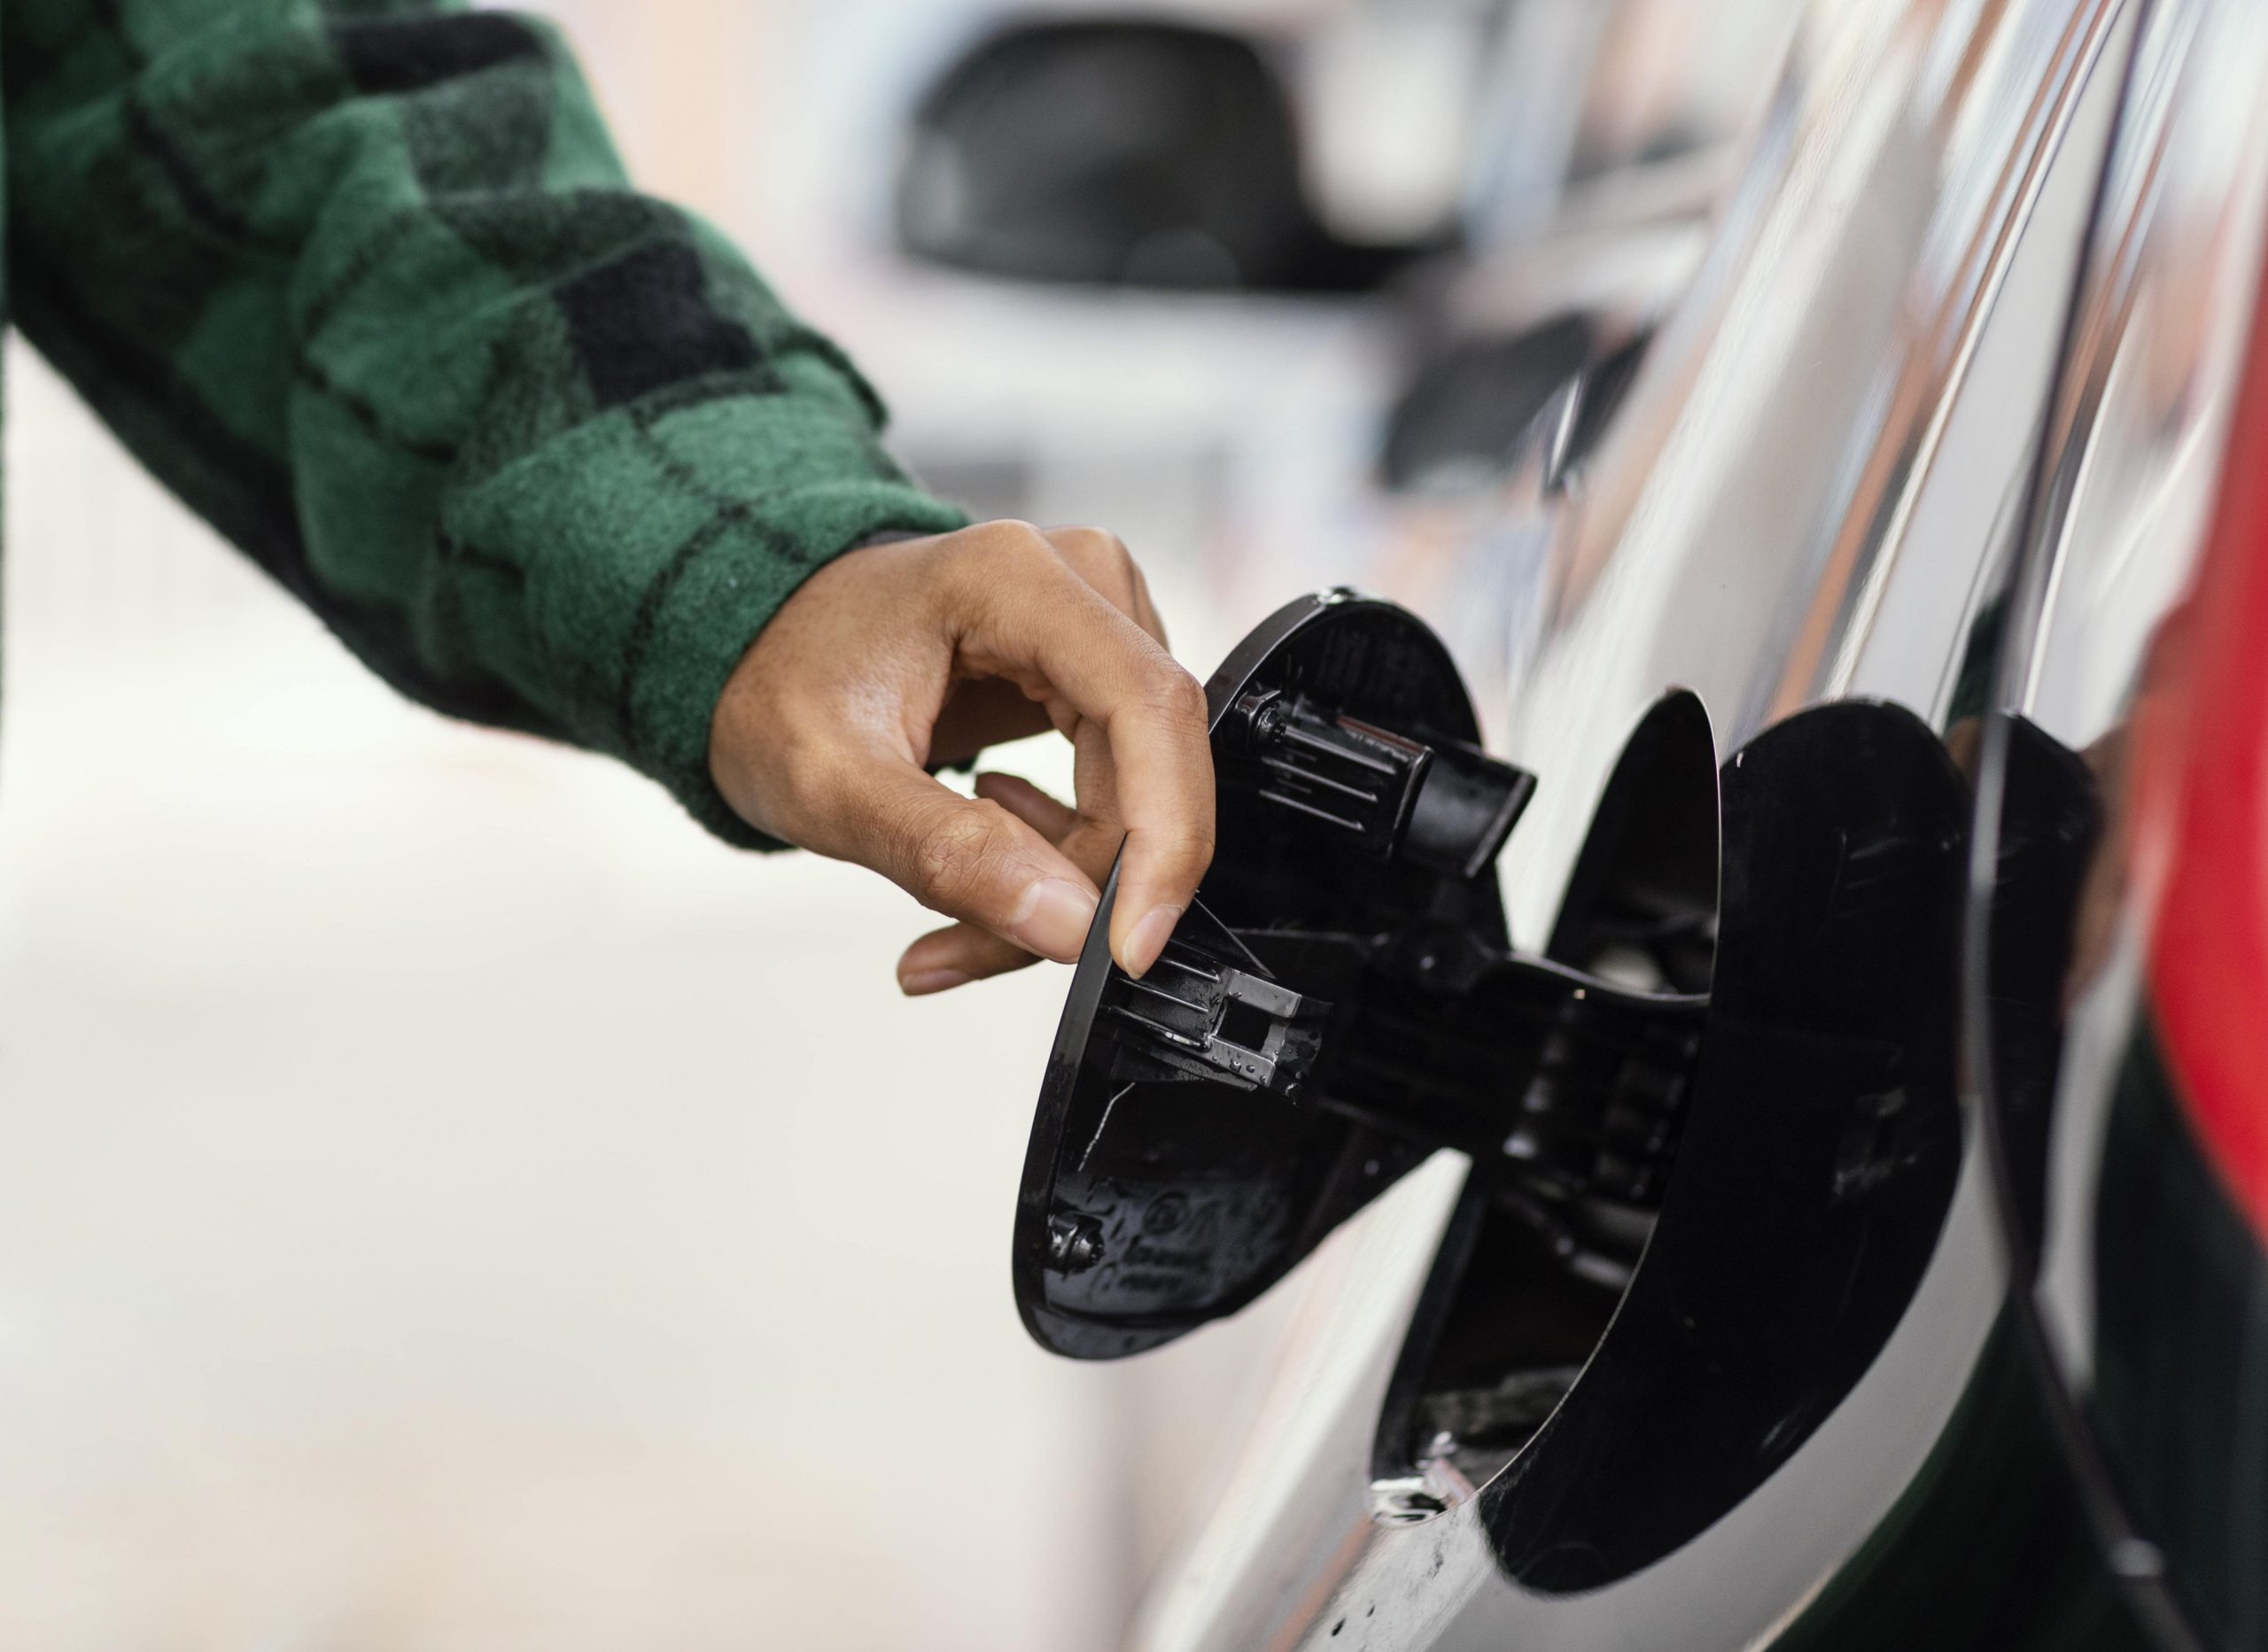 Save Money on Gas: Ways to Cut Costs at the Pump & via Maintenance (19)